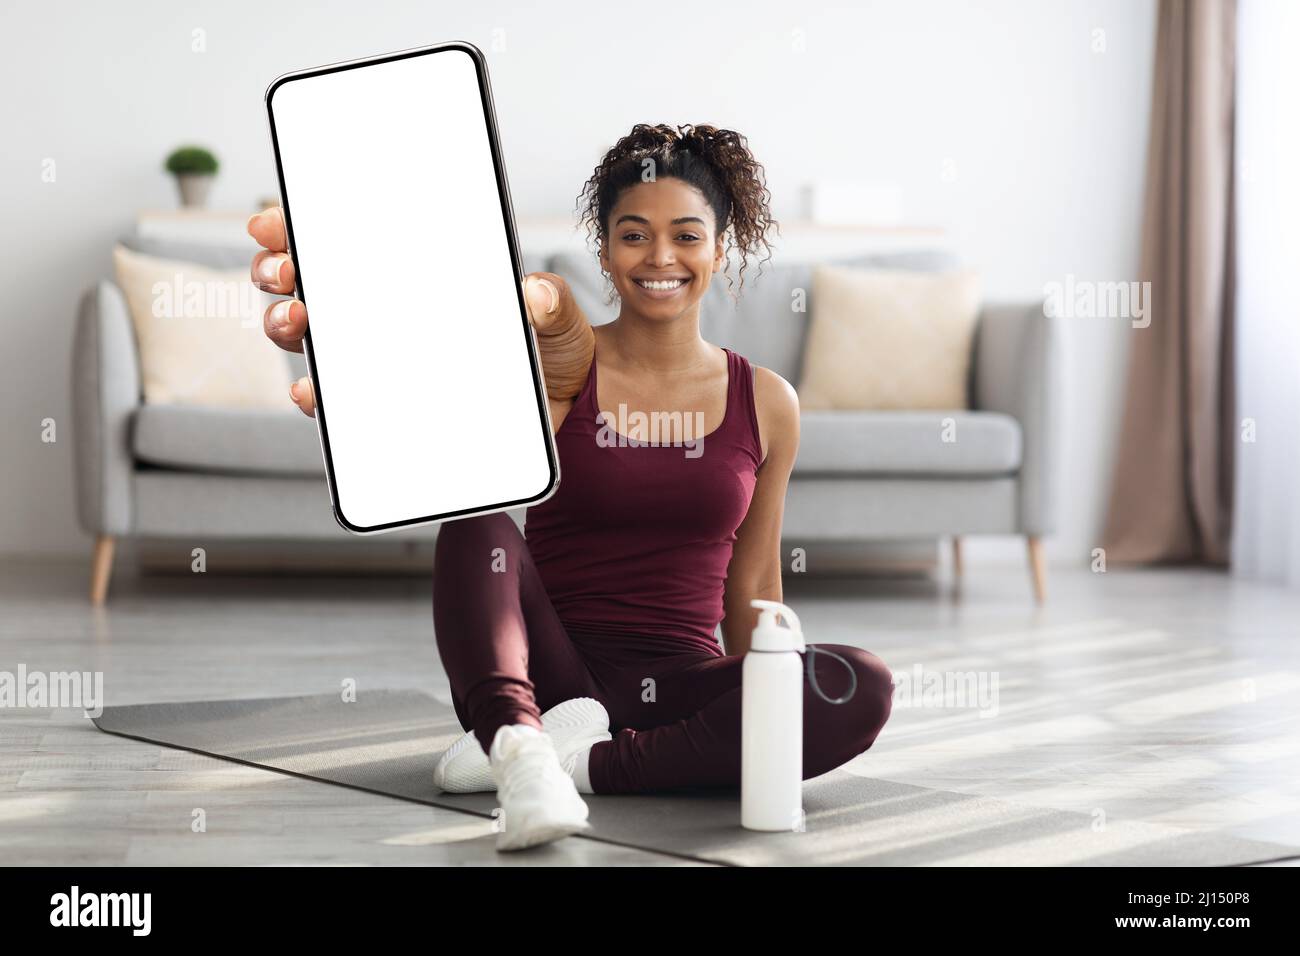 Happy athletic black woman showing mobile phone, mockup Stock Photo